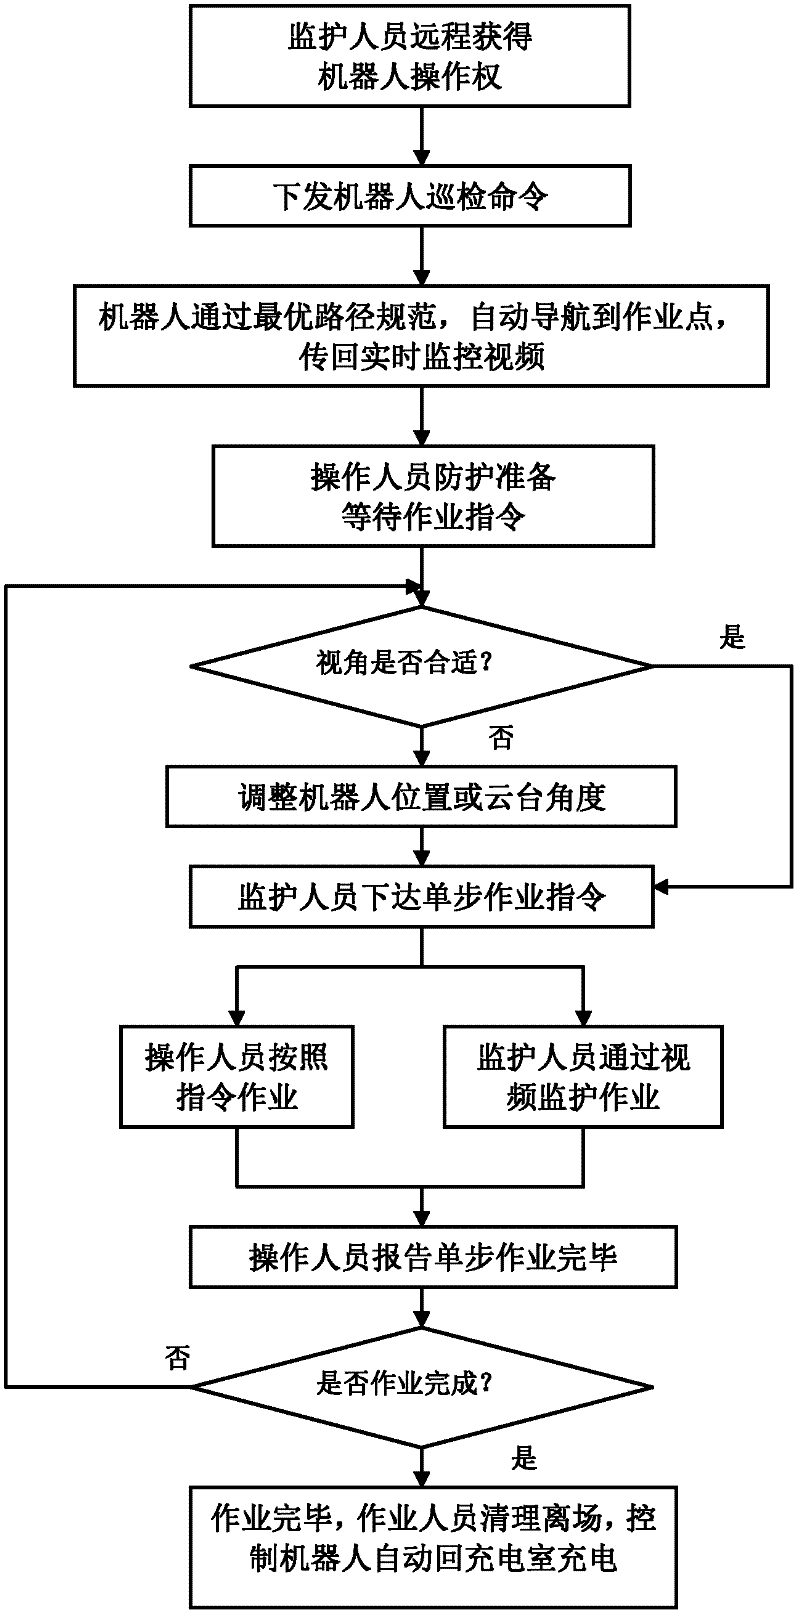 Routing inspection system based on intelligent robot of transformer station and method for monitoring operation of transformer station